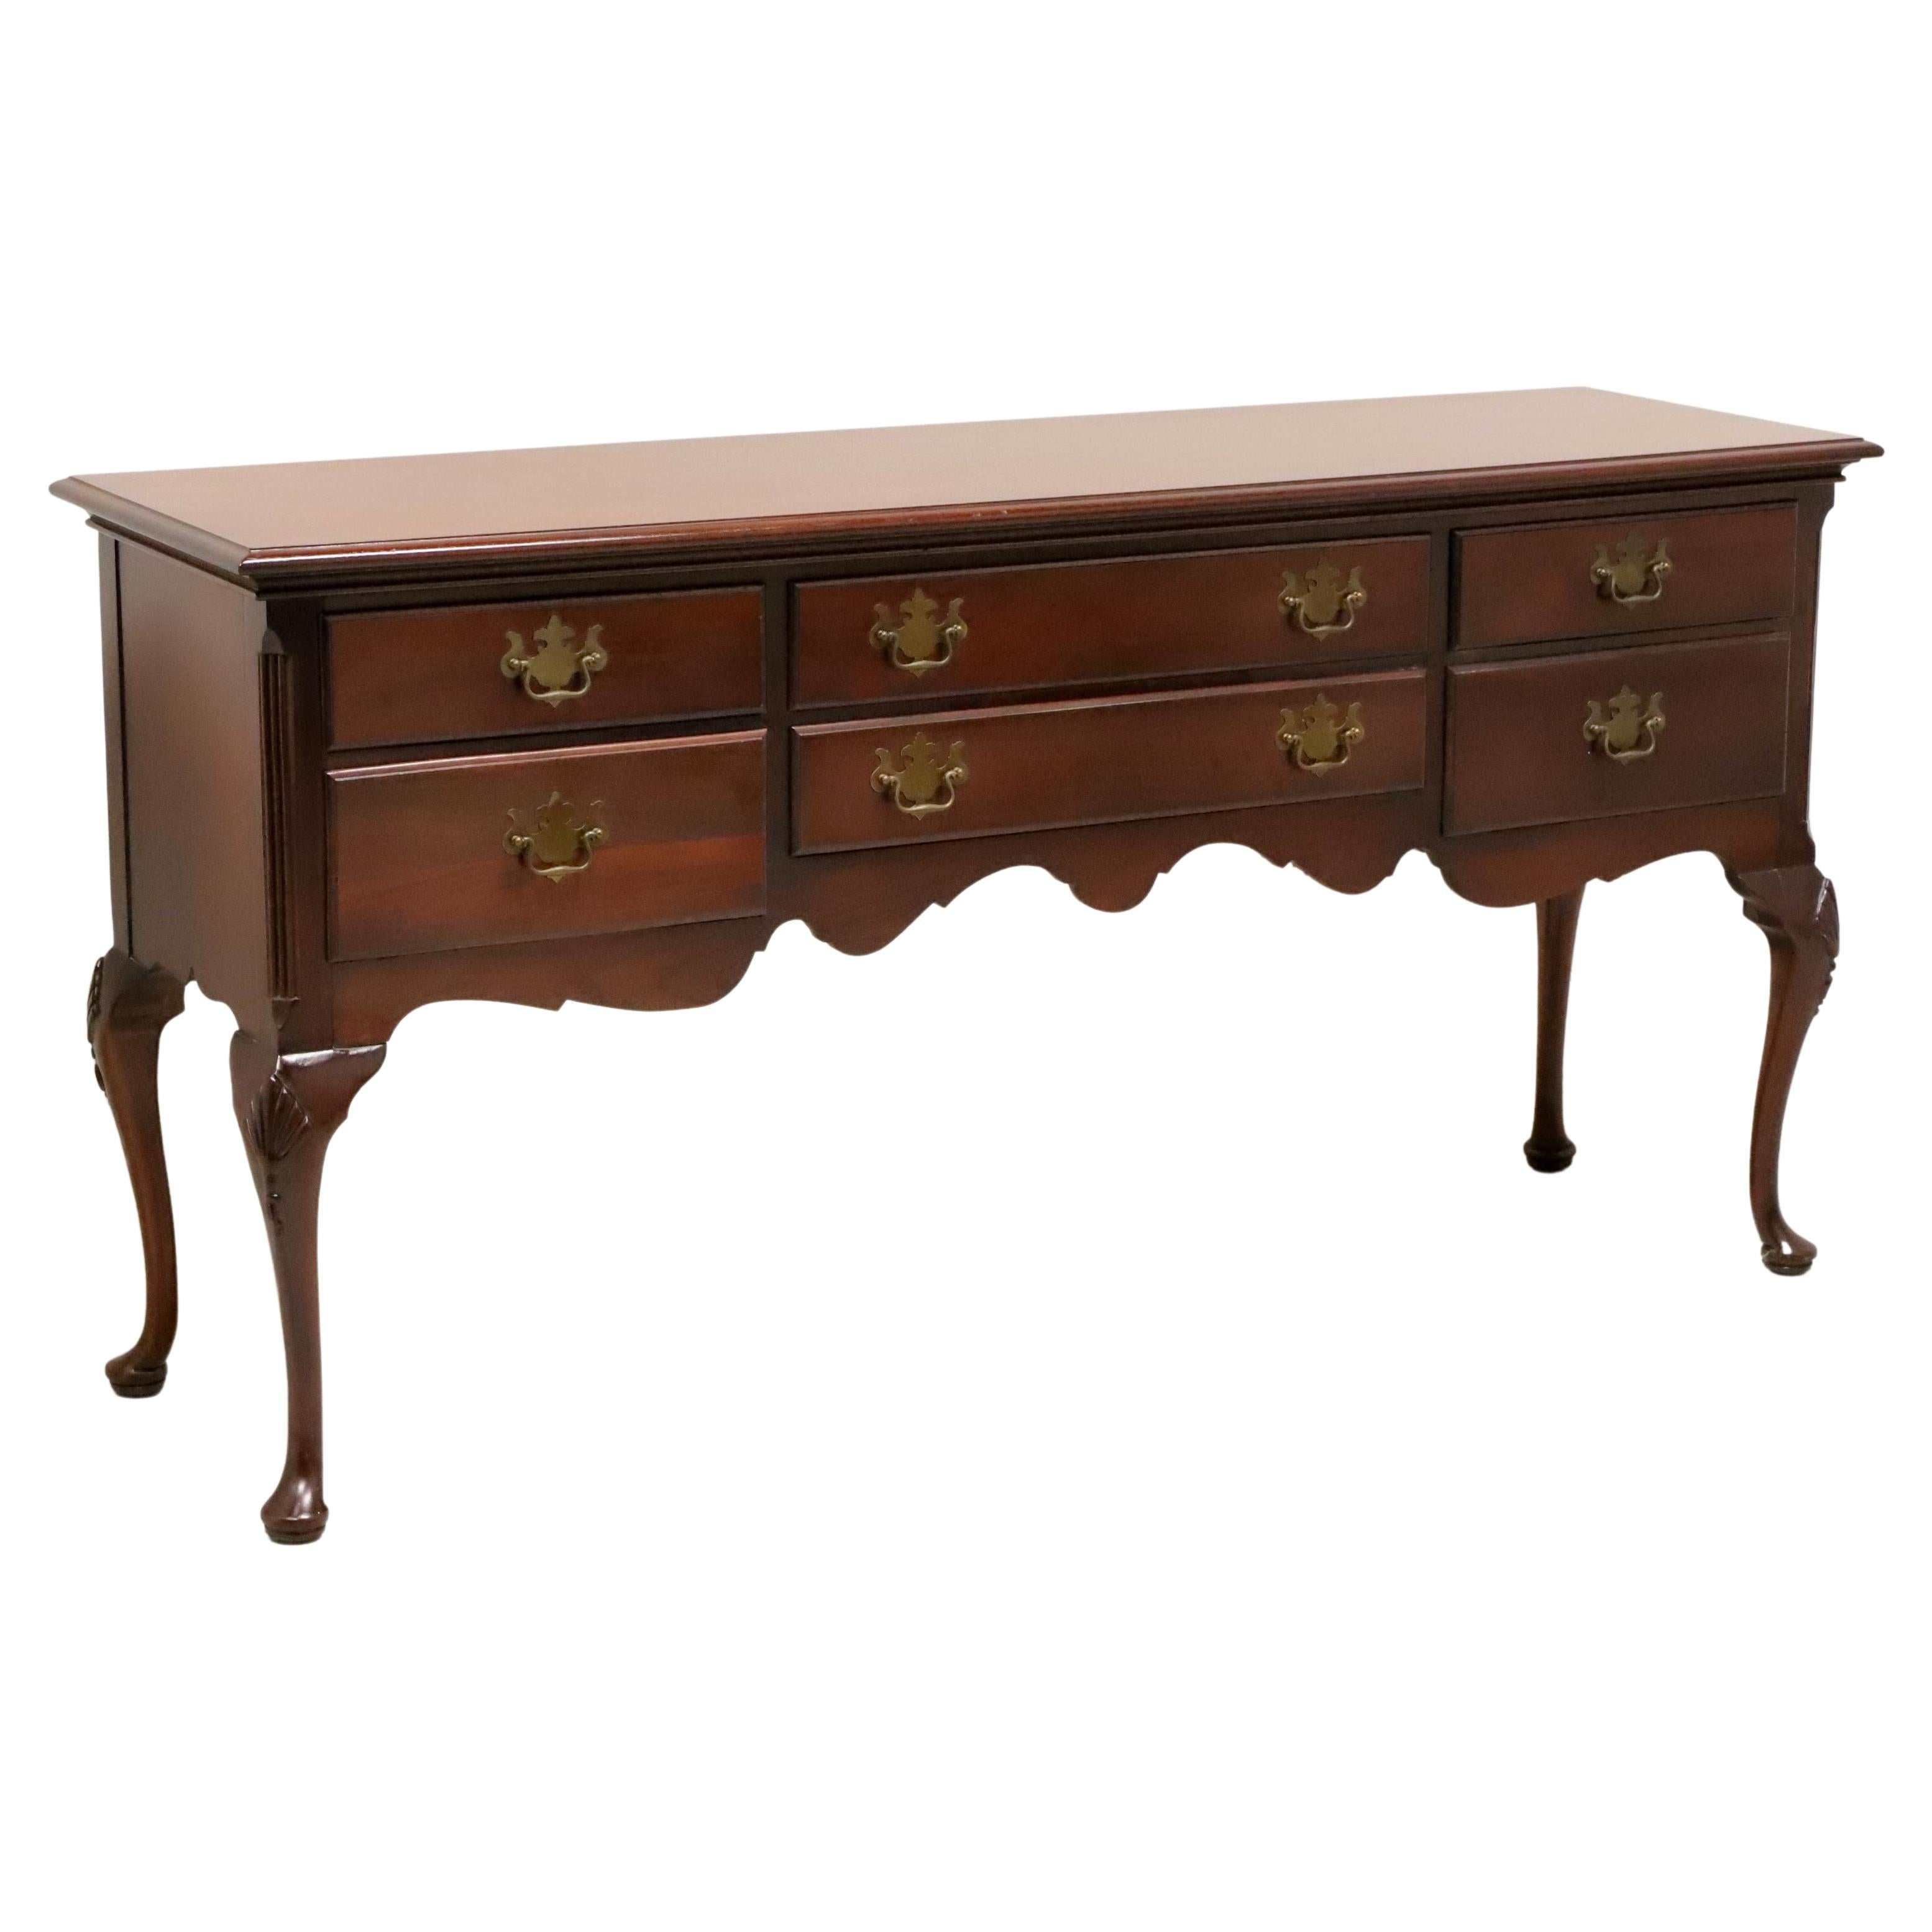 HICKORY CHAIR James River Pflanzgefäße aus Mahagoni Queen Anne Huntboard Sideboard